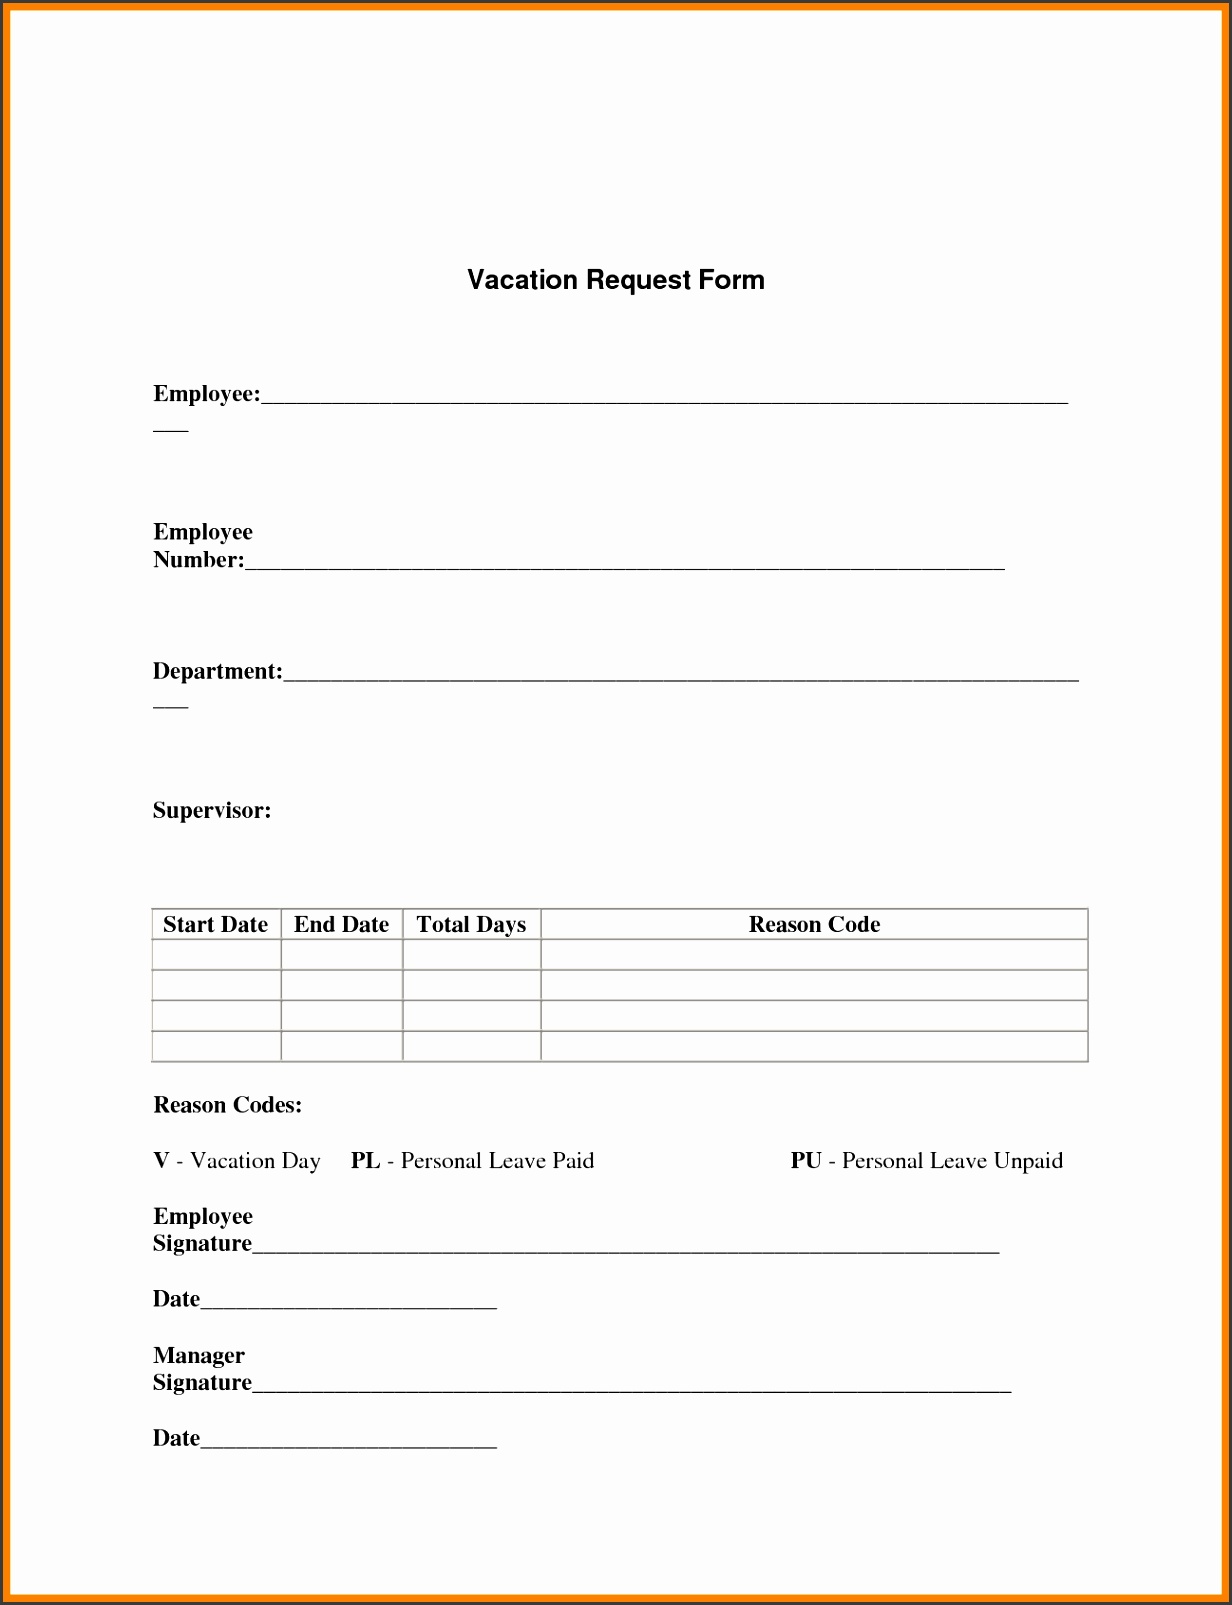 Request For Leave Form Template able invitation templates vehicle contract template